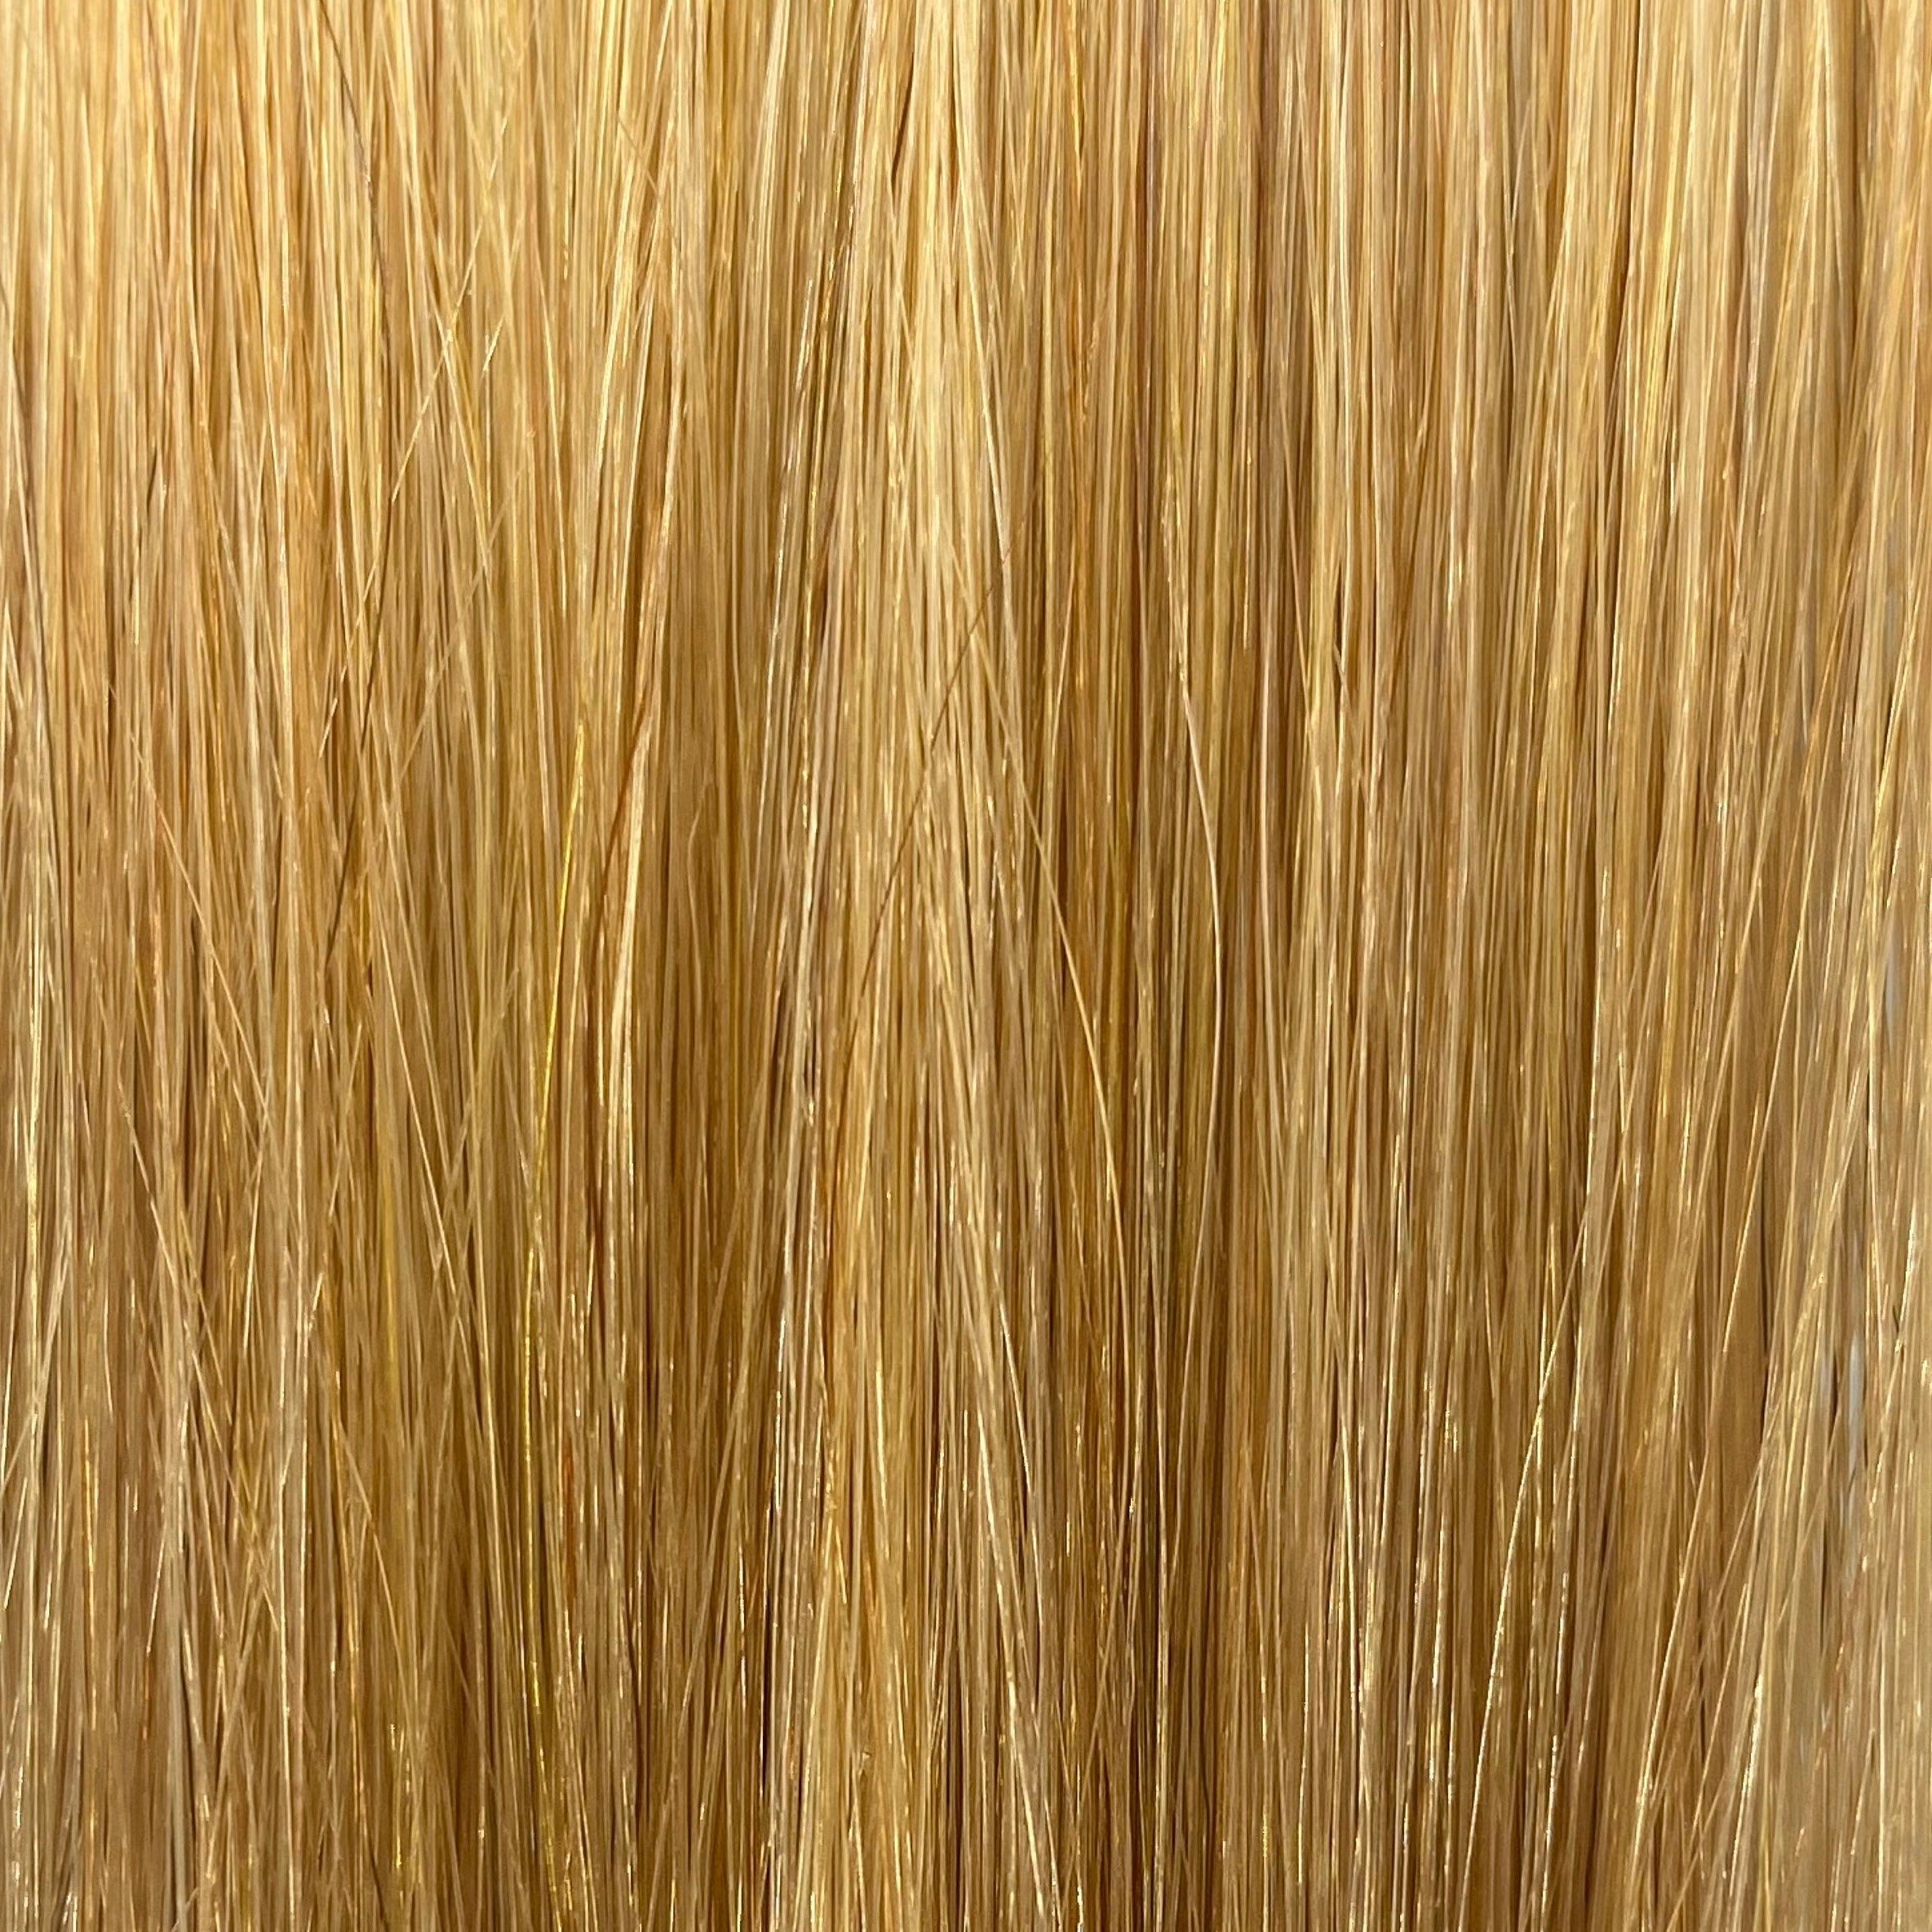 FUSION #DB3 GOLDEN BLONDE - 60CM/24 INCHES- 25 GRAMS